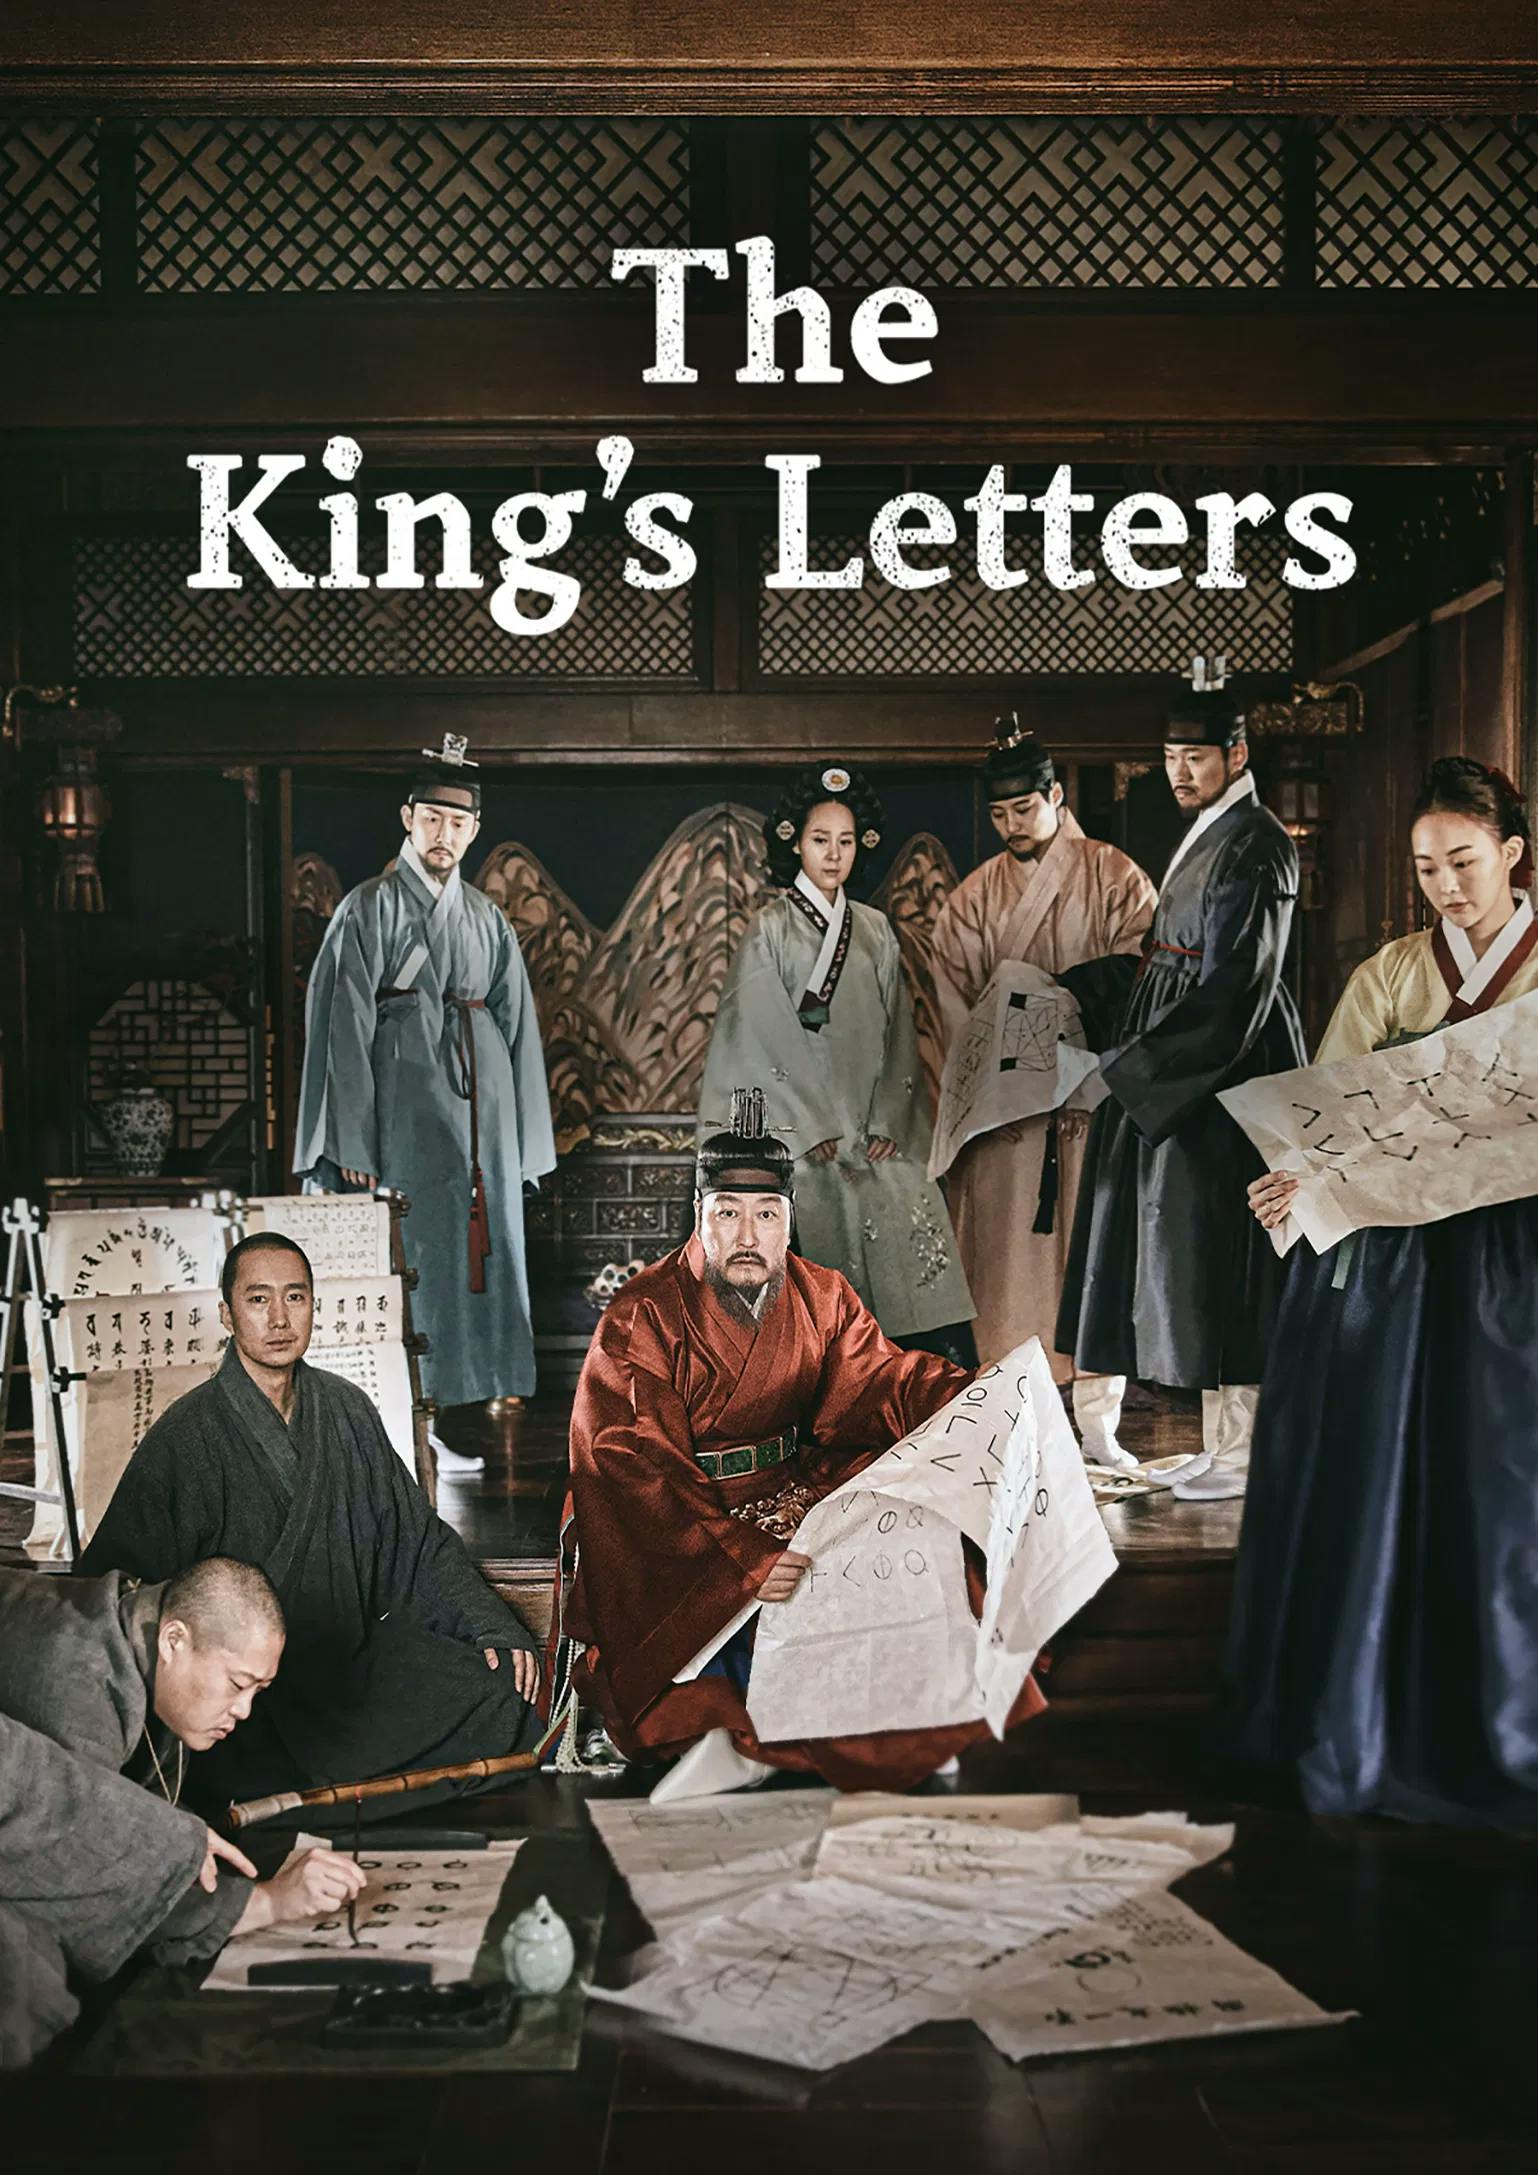 The King's Letters poster